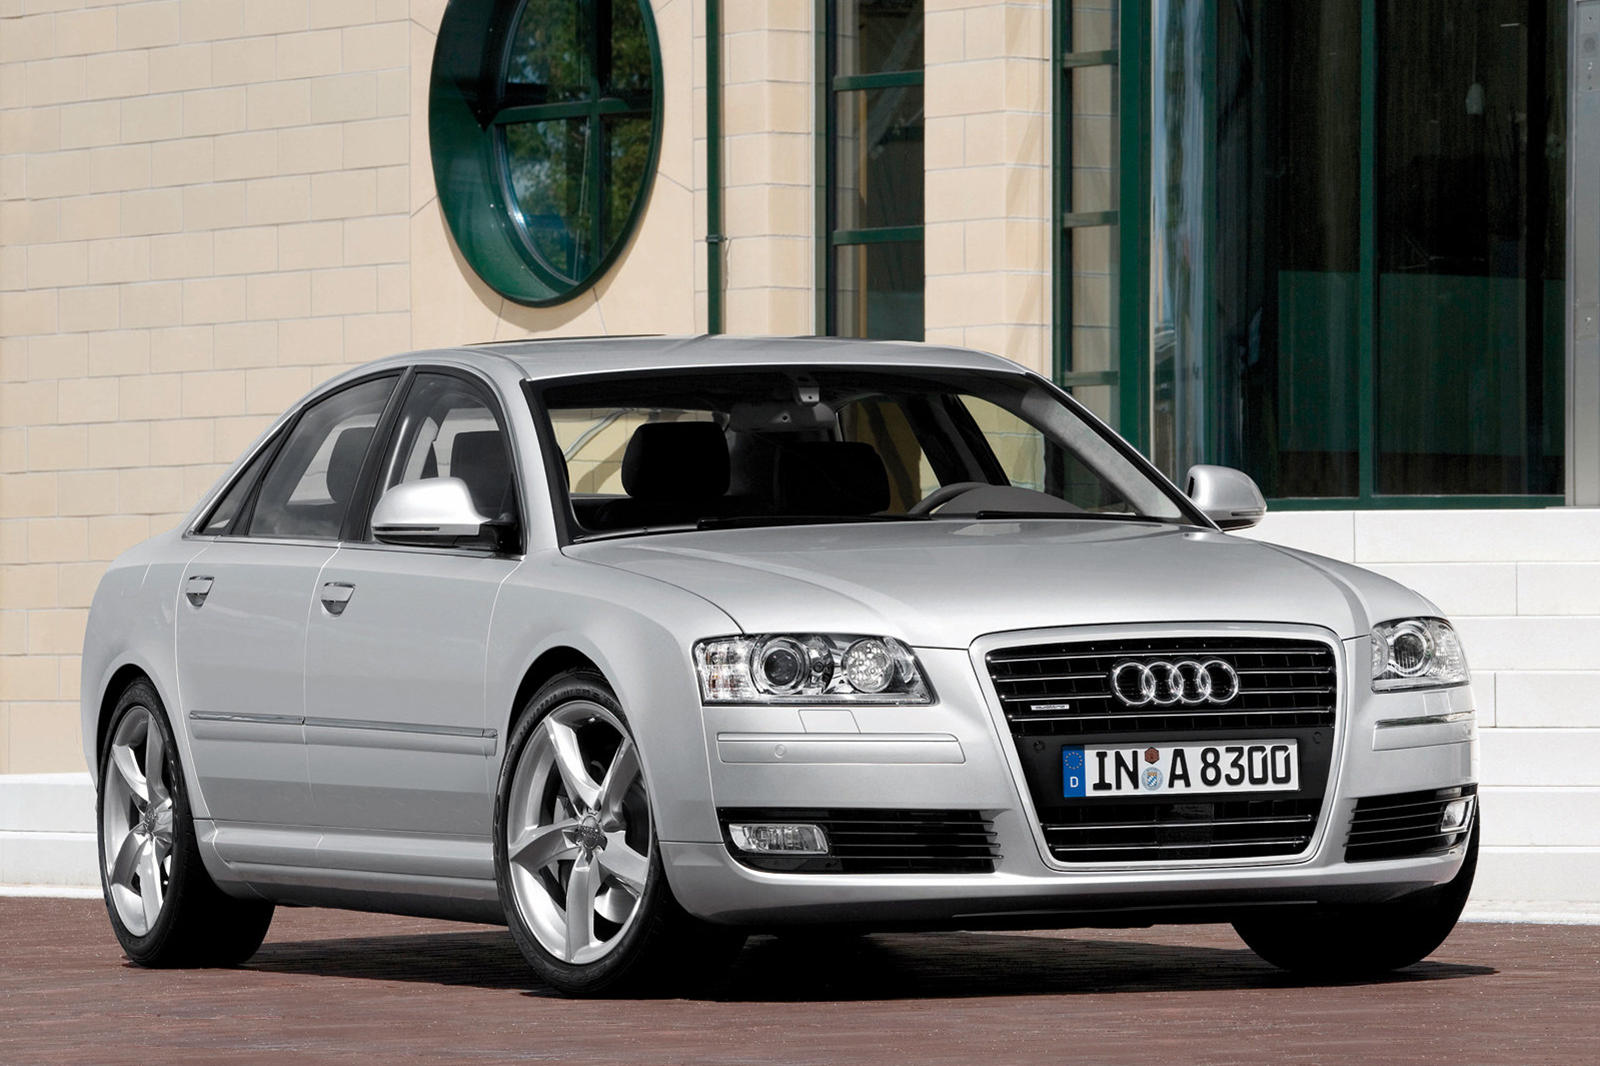 2010 Audi A8 Front Angle View